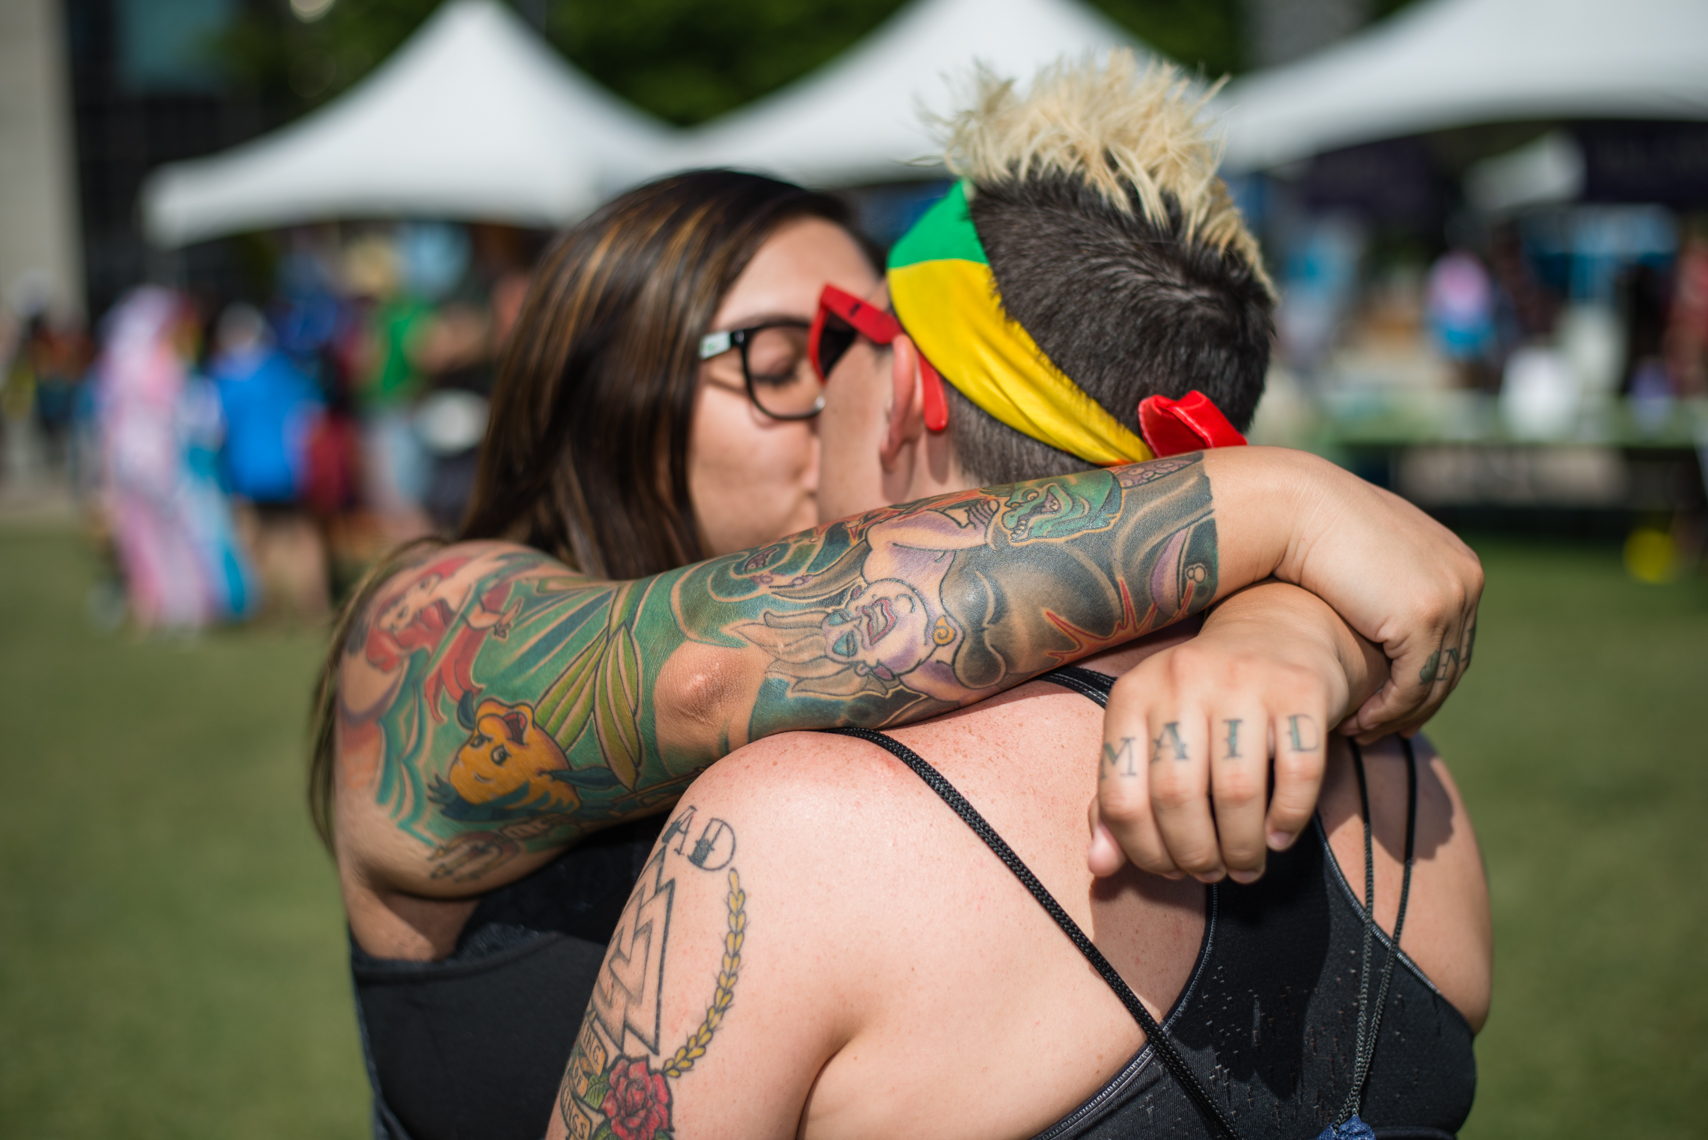 Nashville Pride Festival 2017 | Photographer + Director, Kristina Krug | authentic, authenticity, bisexual, celebrate, celebration, civil, civil liberties, courage, dancing, documentary, drag, emotions, equality, esteem, fearless, festival, festive, free, freedom, friends, fun, gay, happy, journalism, joy, joyful, Kristina Krug, krug photo, lesbian, LGBT, LGBTQ, liberty, love, love wins, loved, love is love, loveliness, lovers, love wins, men, National Pride Day, parade, people, photographer, photojournalism, photojournalist, Portrait, Predators, pride, Pride Parade, proud, queen, queer, relationship, reportage, respect, rights, safety, self, sexuality, summer, sun, sunny, Transgender, women, couple, lesbian couple with tattoos, kissing in a warm embrace at Public Square Park in Nashville, TN